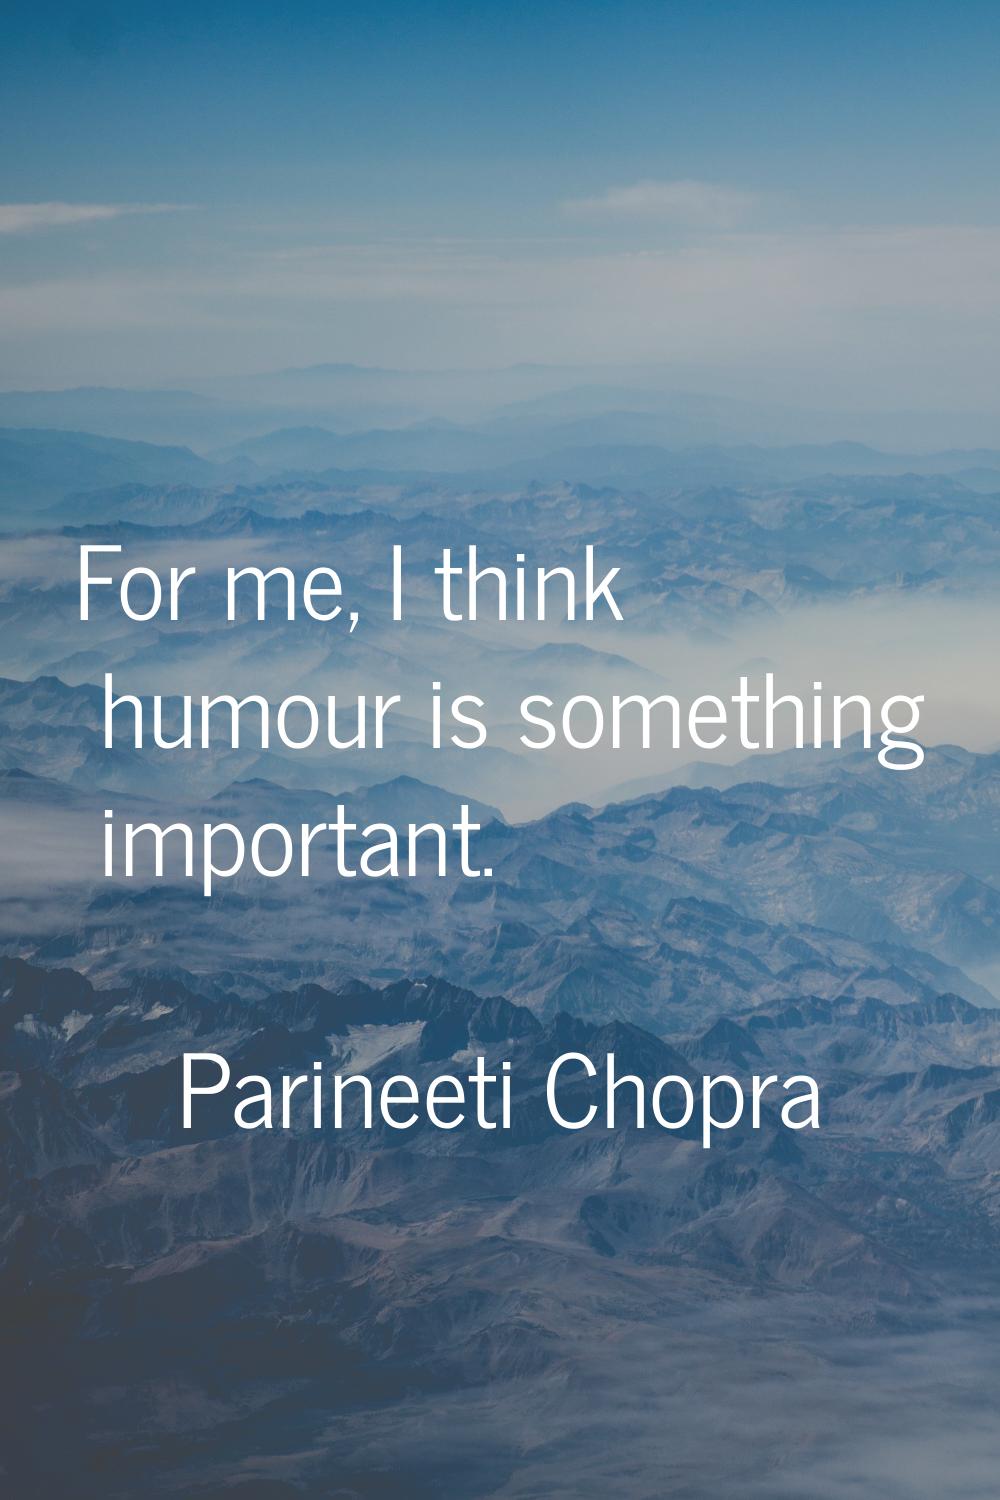 For me, I think humour is something important.